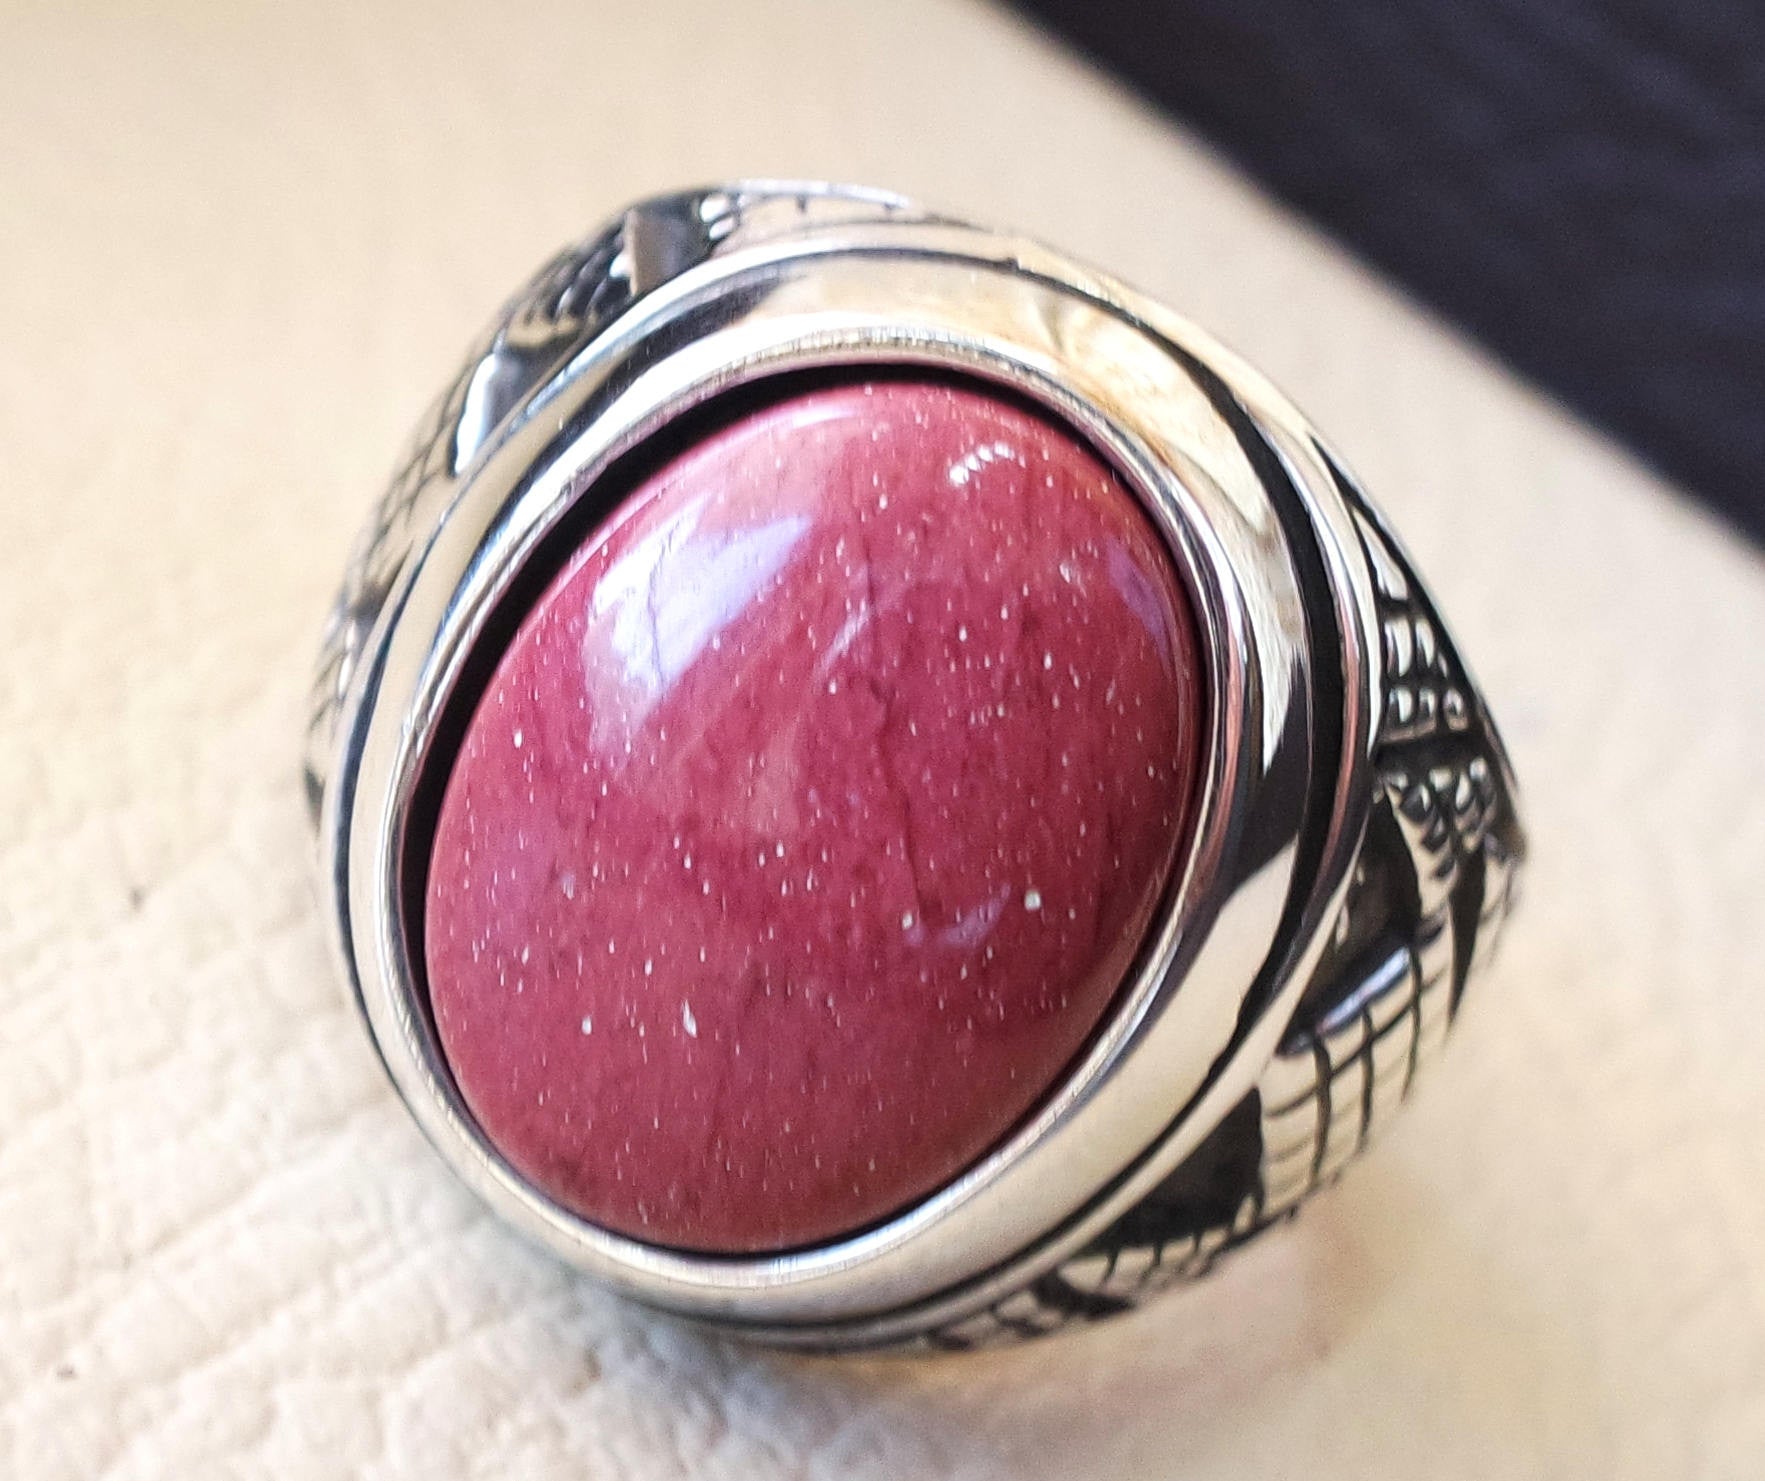 red rose mookaite jasper aqeeq natural stone sterling silver 925 heavy men ring vintage arabic ottoman style all sizes fast shipping